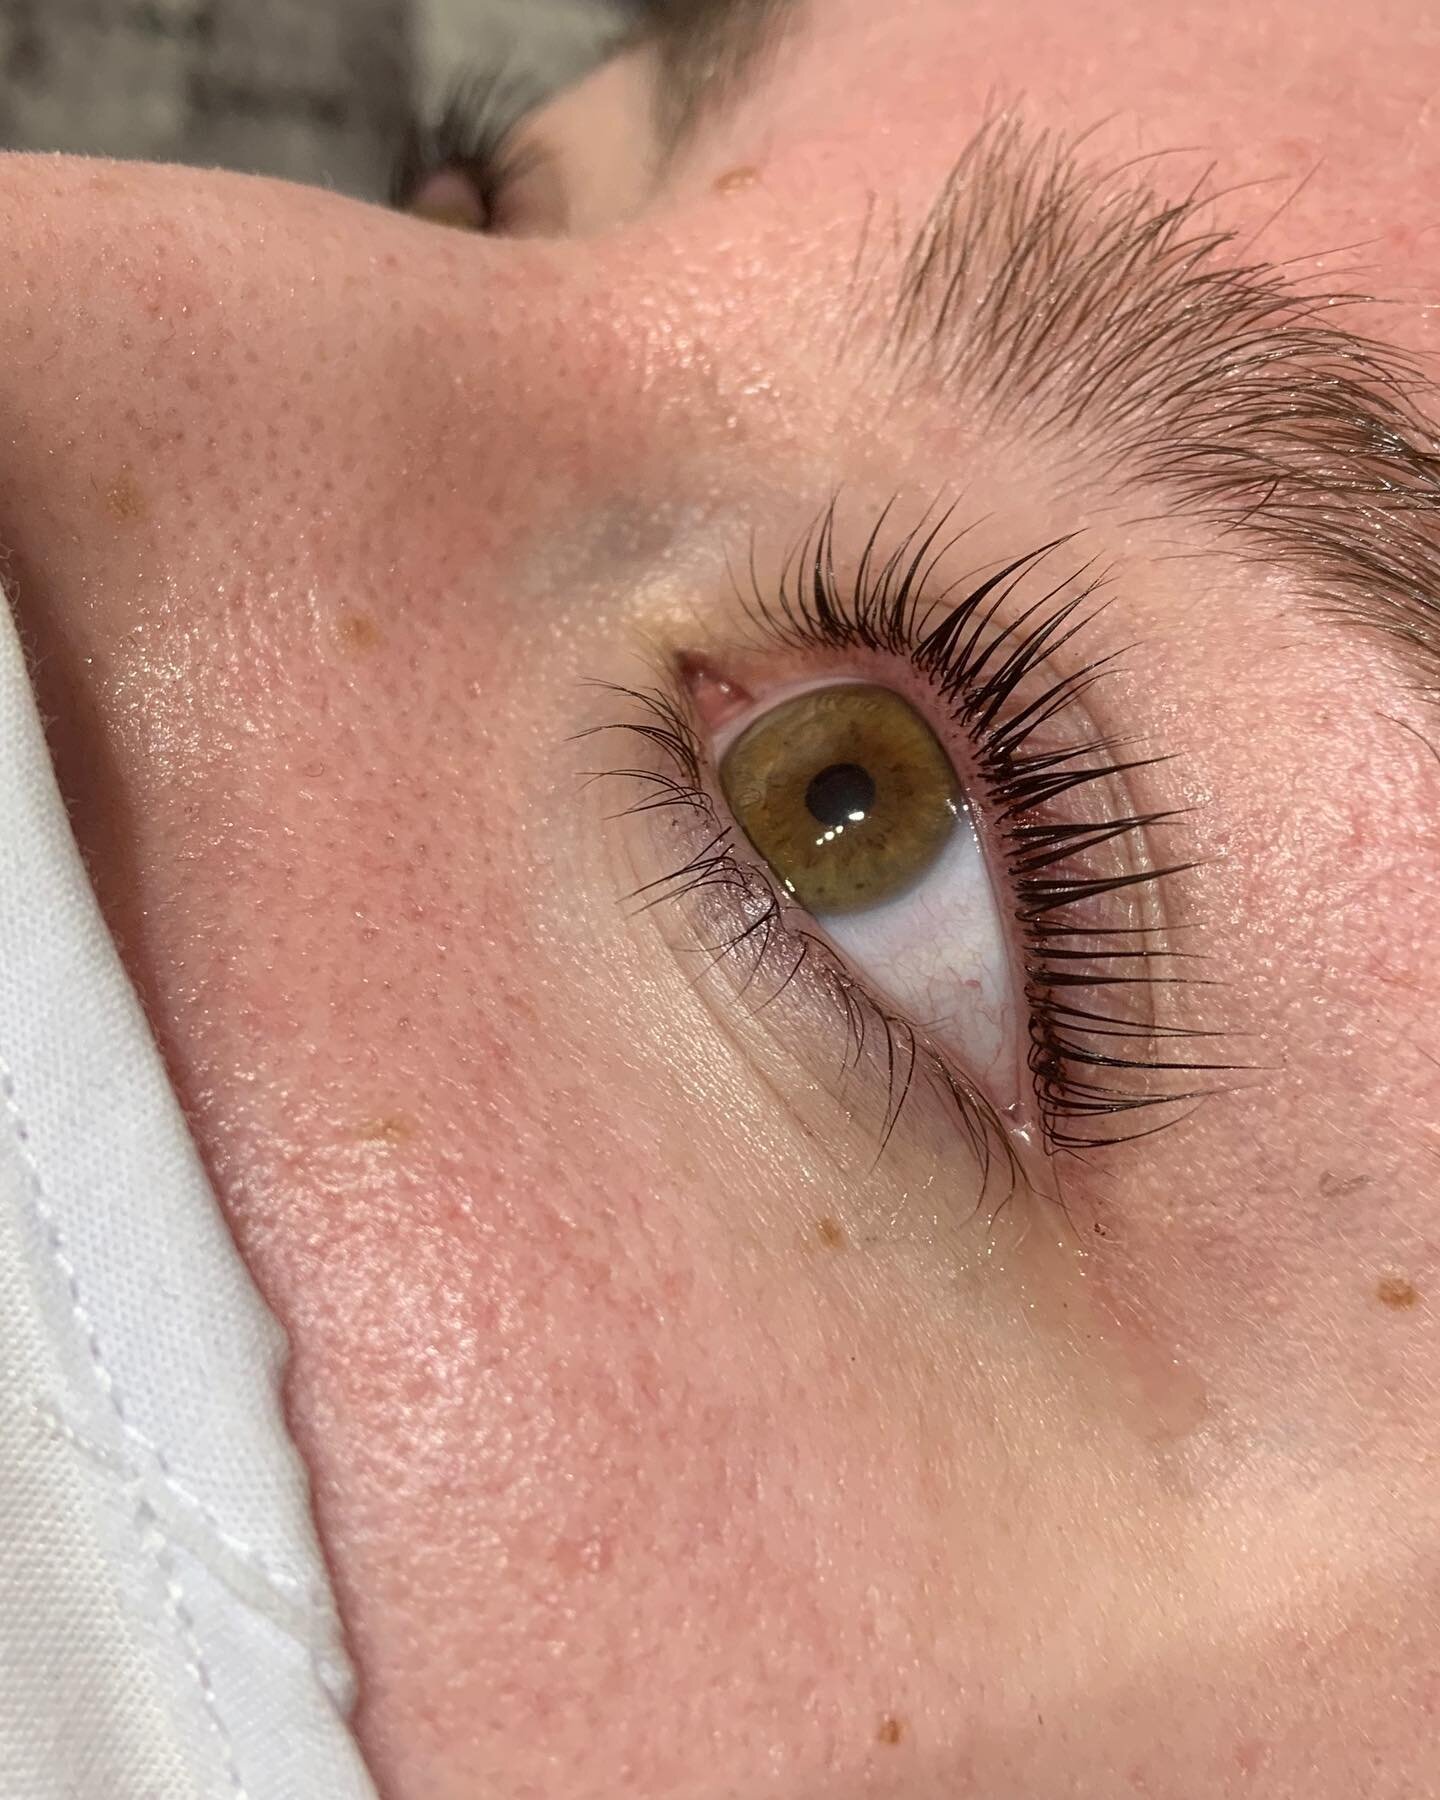 Heather has time this Friday after 5 for lash lifts and sugaring! Enhance your natural lashes with a Keratin Lash Lift + Tint. Results last up to 8 weeks! More info on our website. Link to book in our profile!